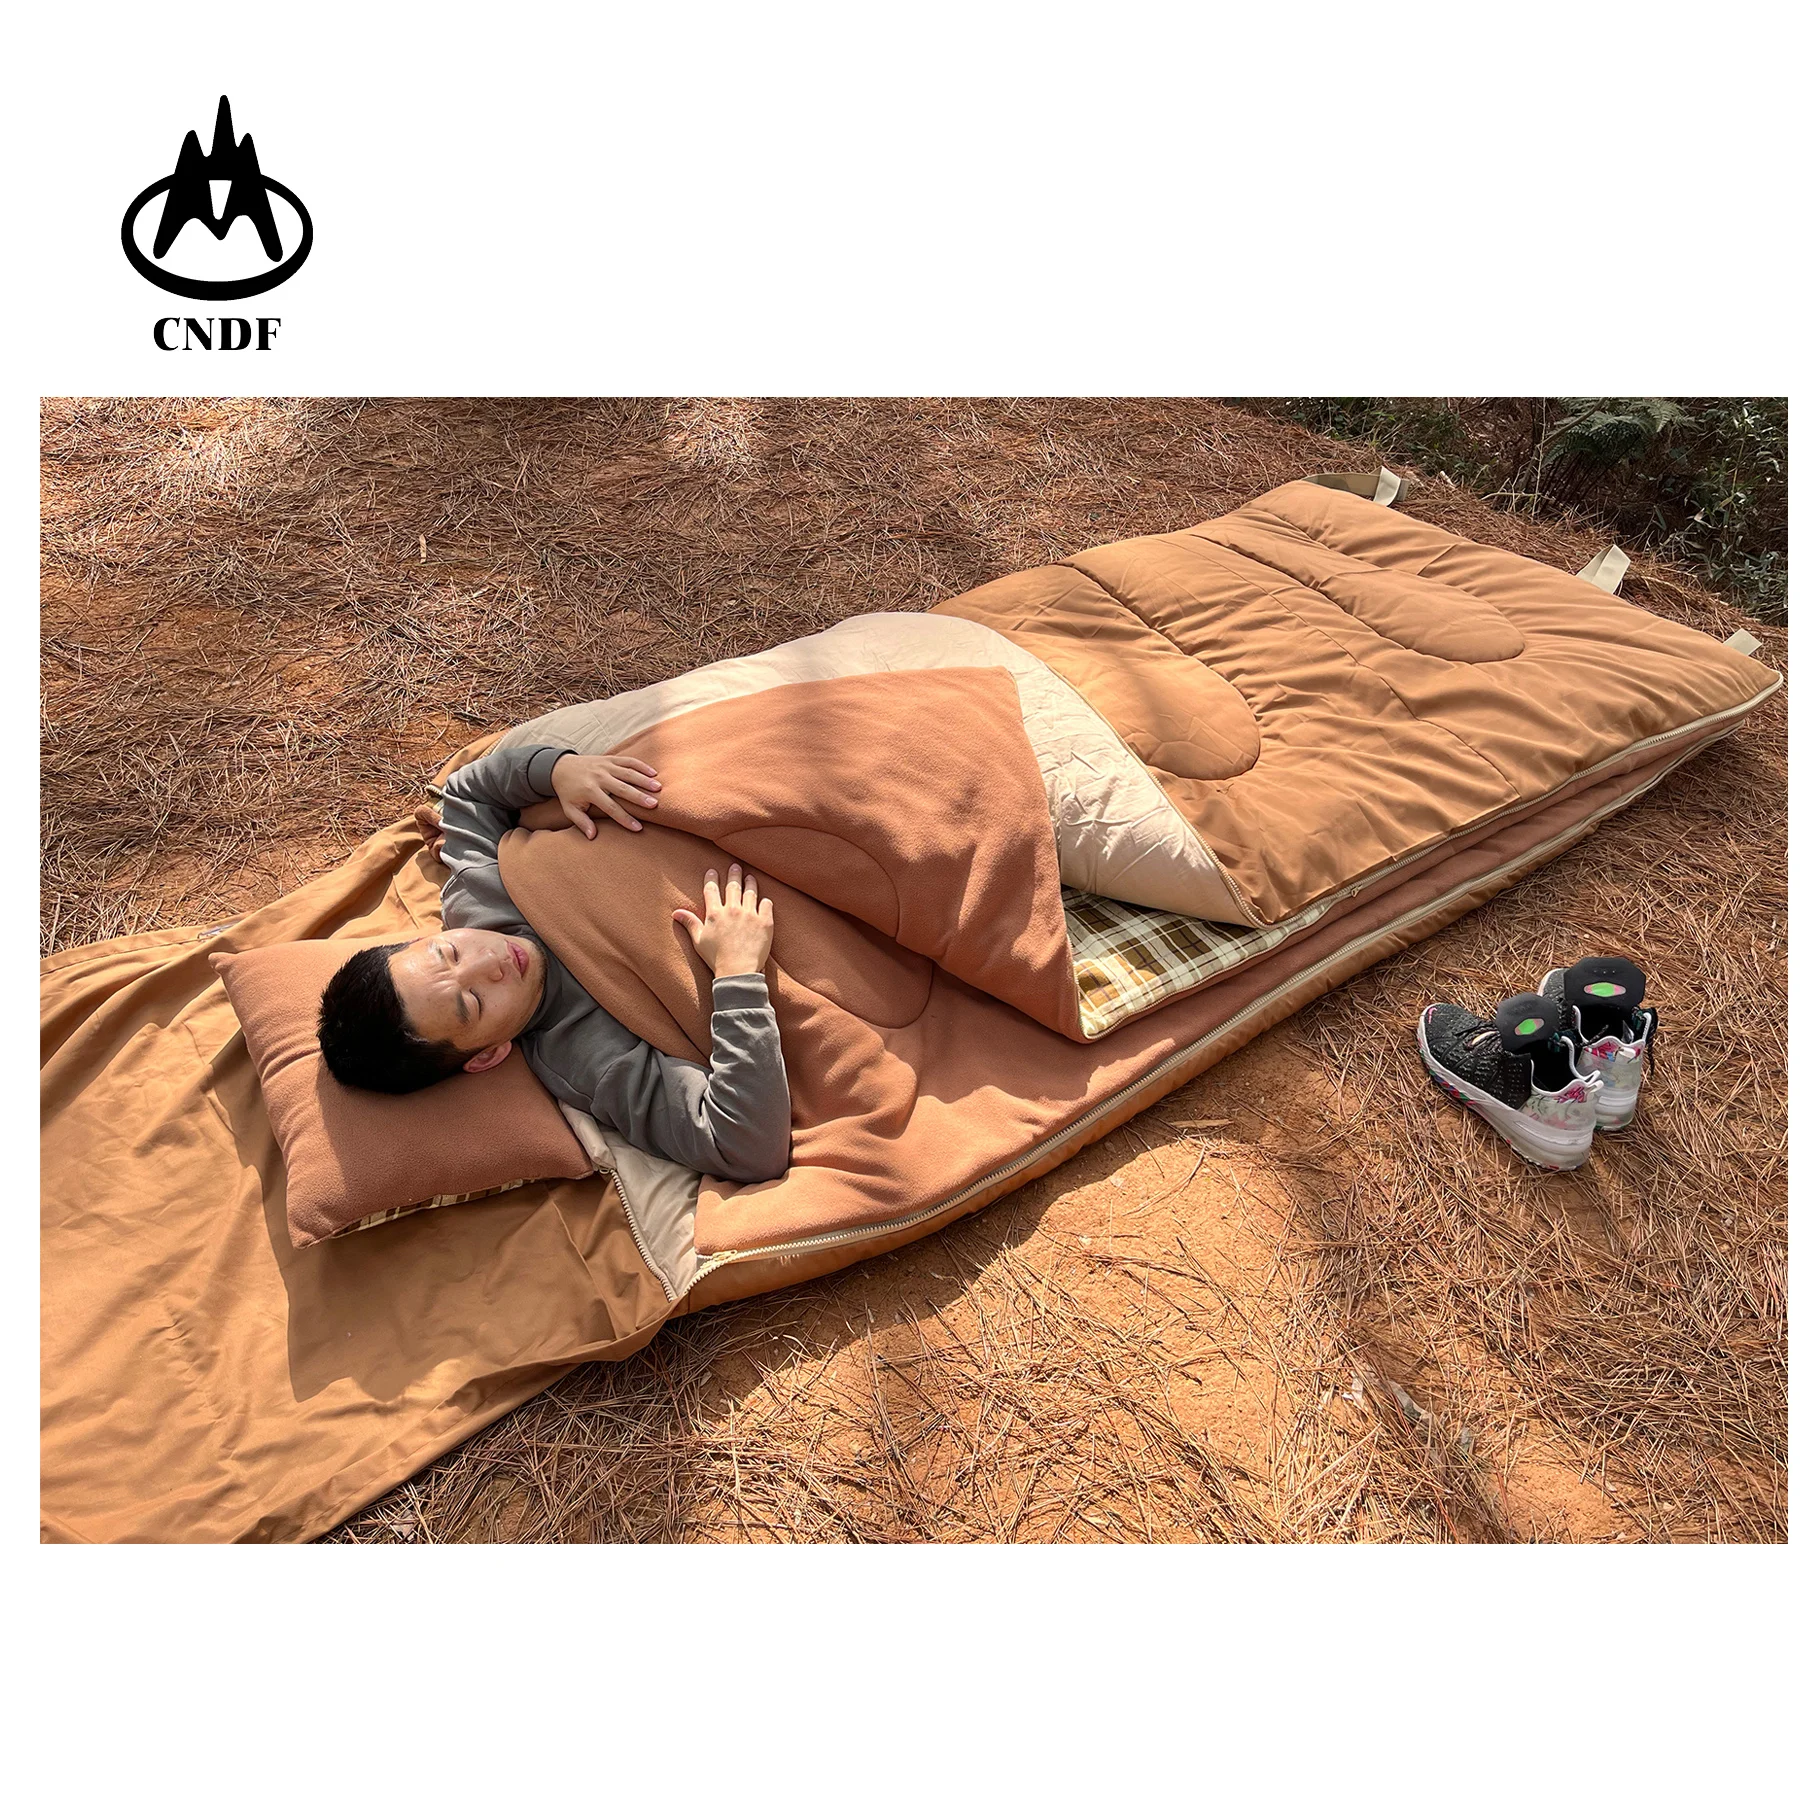 

Luxury 9.5kg -20 degree Cotton Canvas Sleeping Bag with Extra Layer all Season waterproof big size family car camping hunting